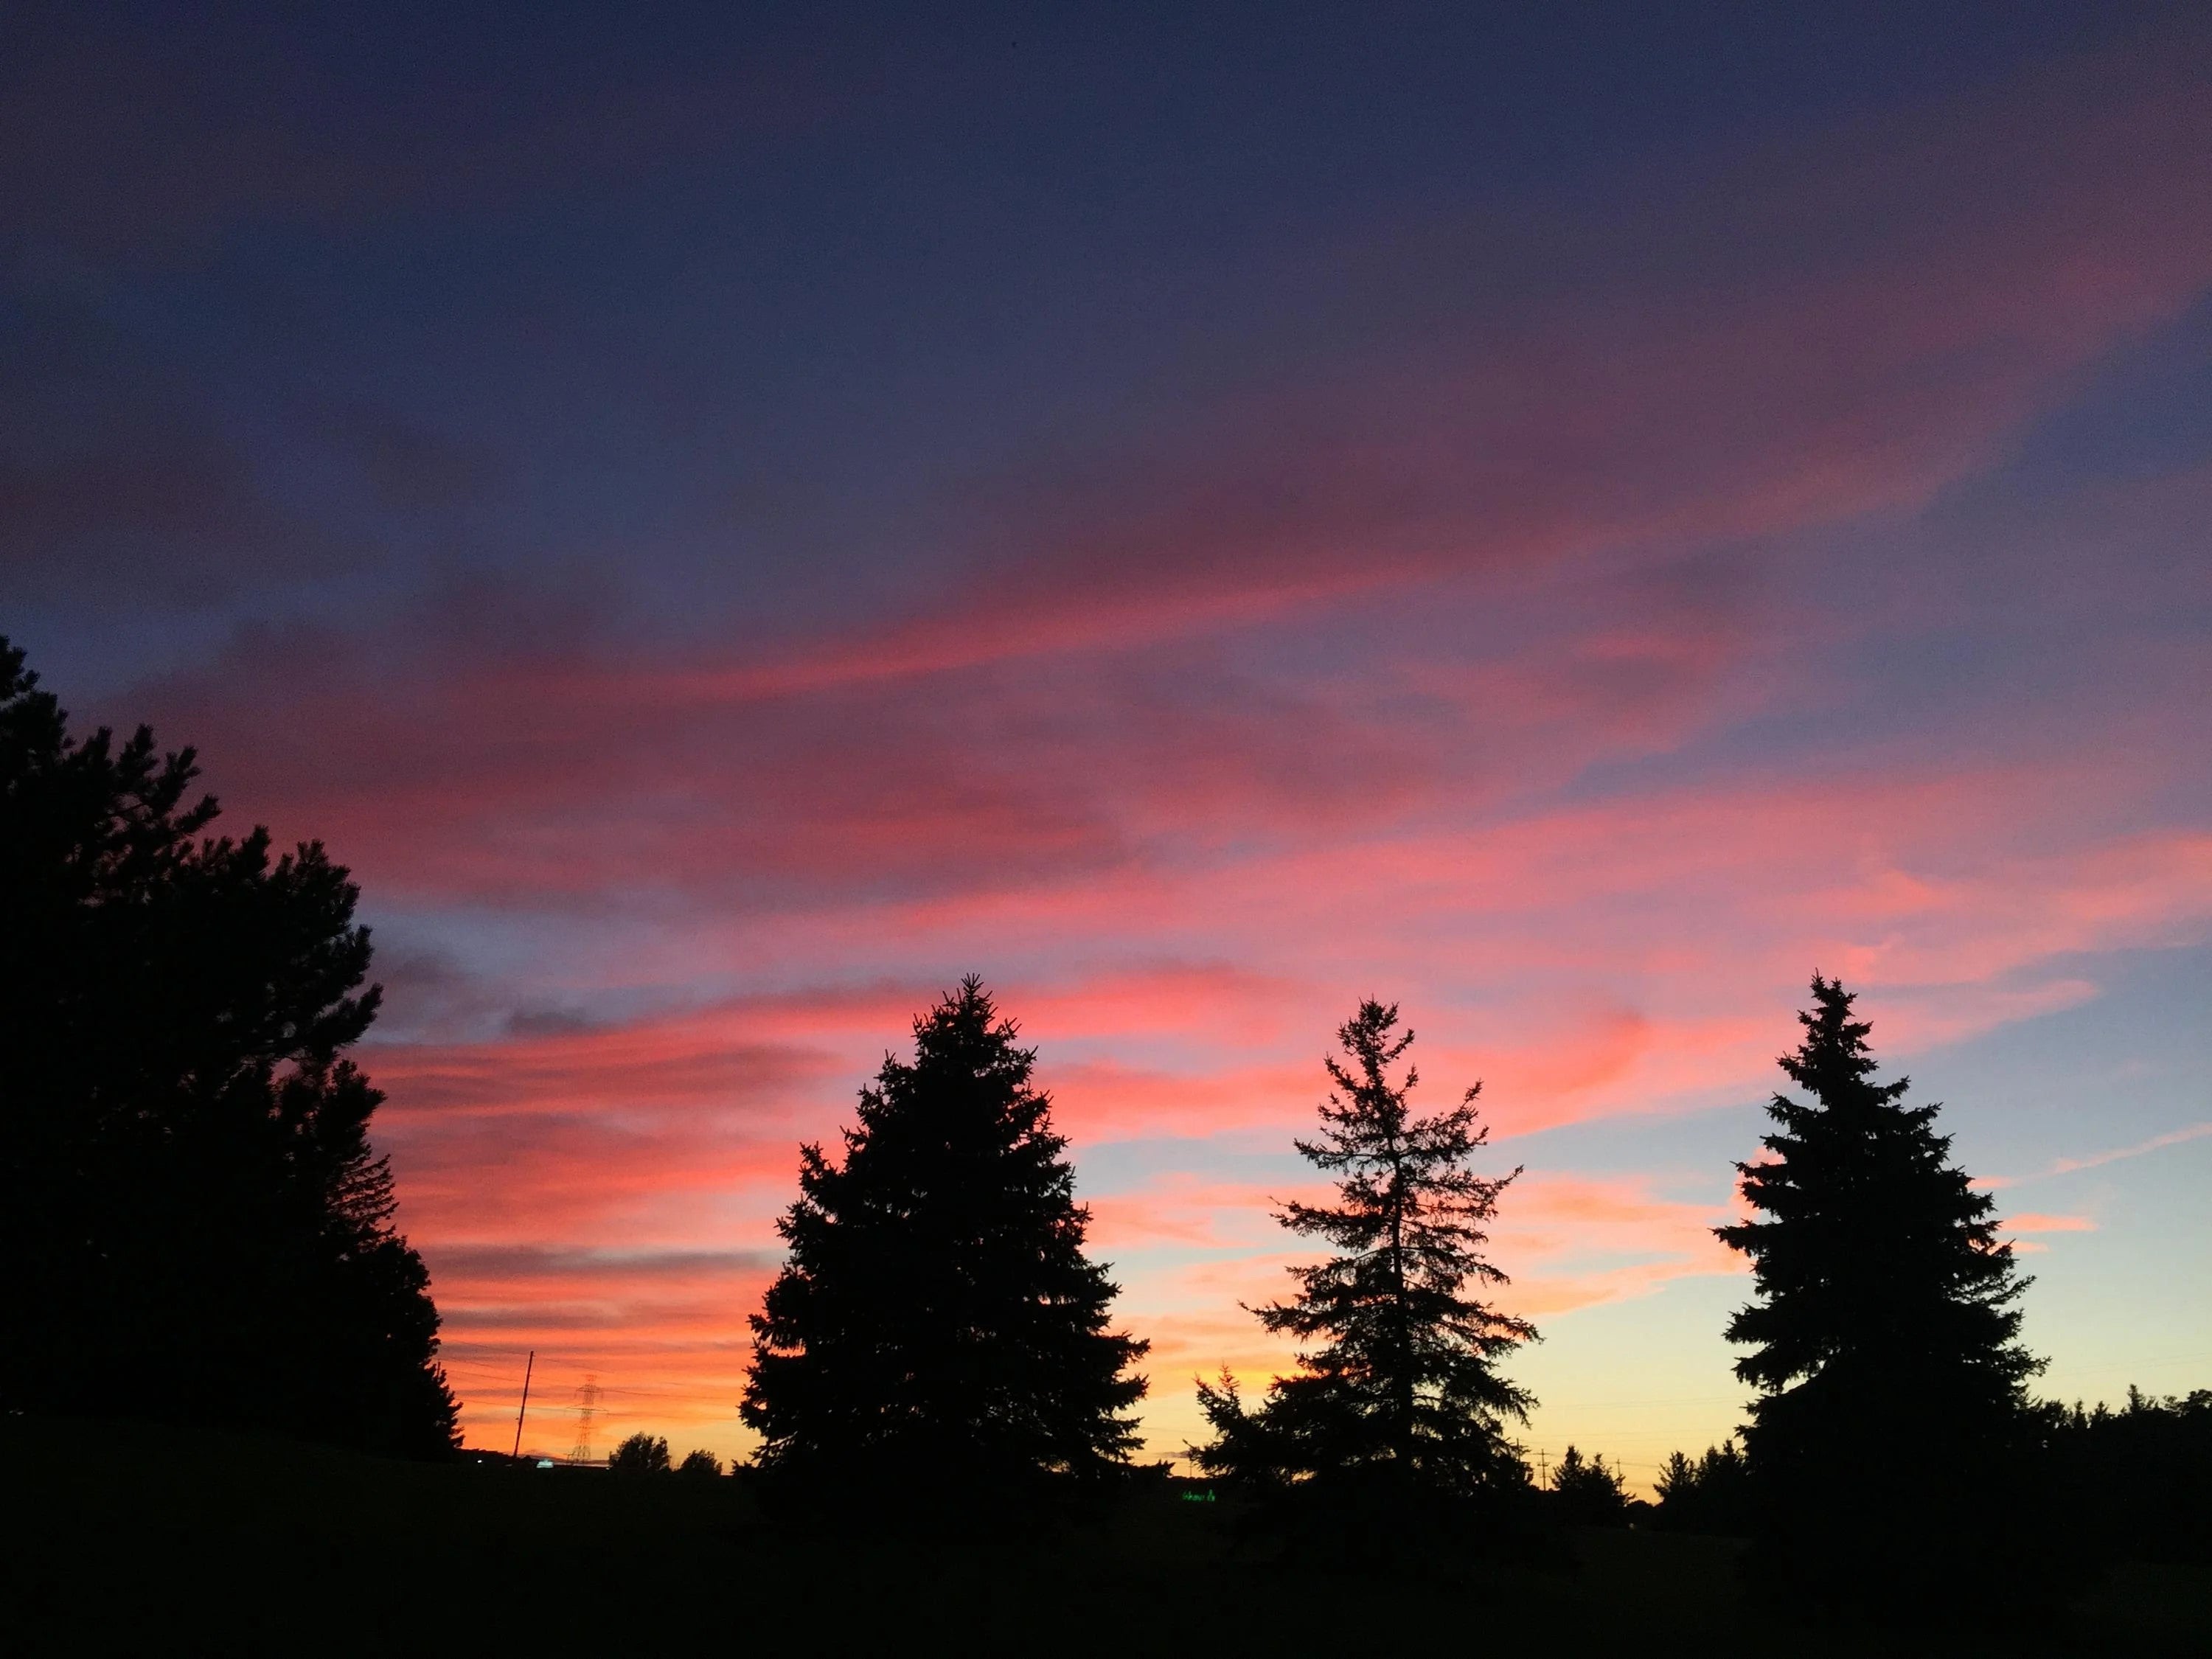 Pink, purple, orange and blue clouds above the treeline at sunset.